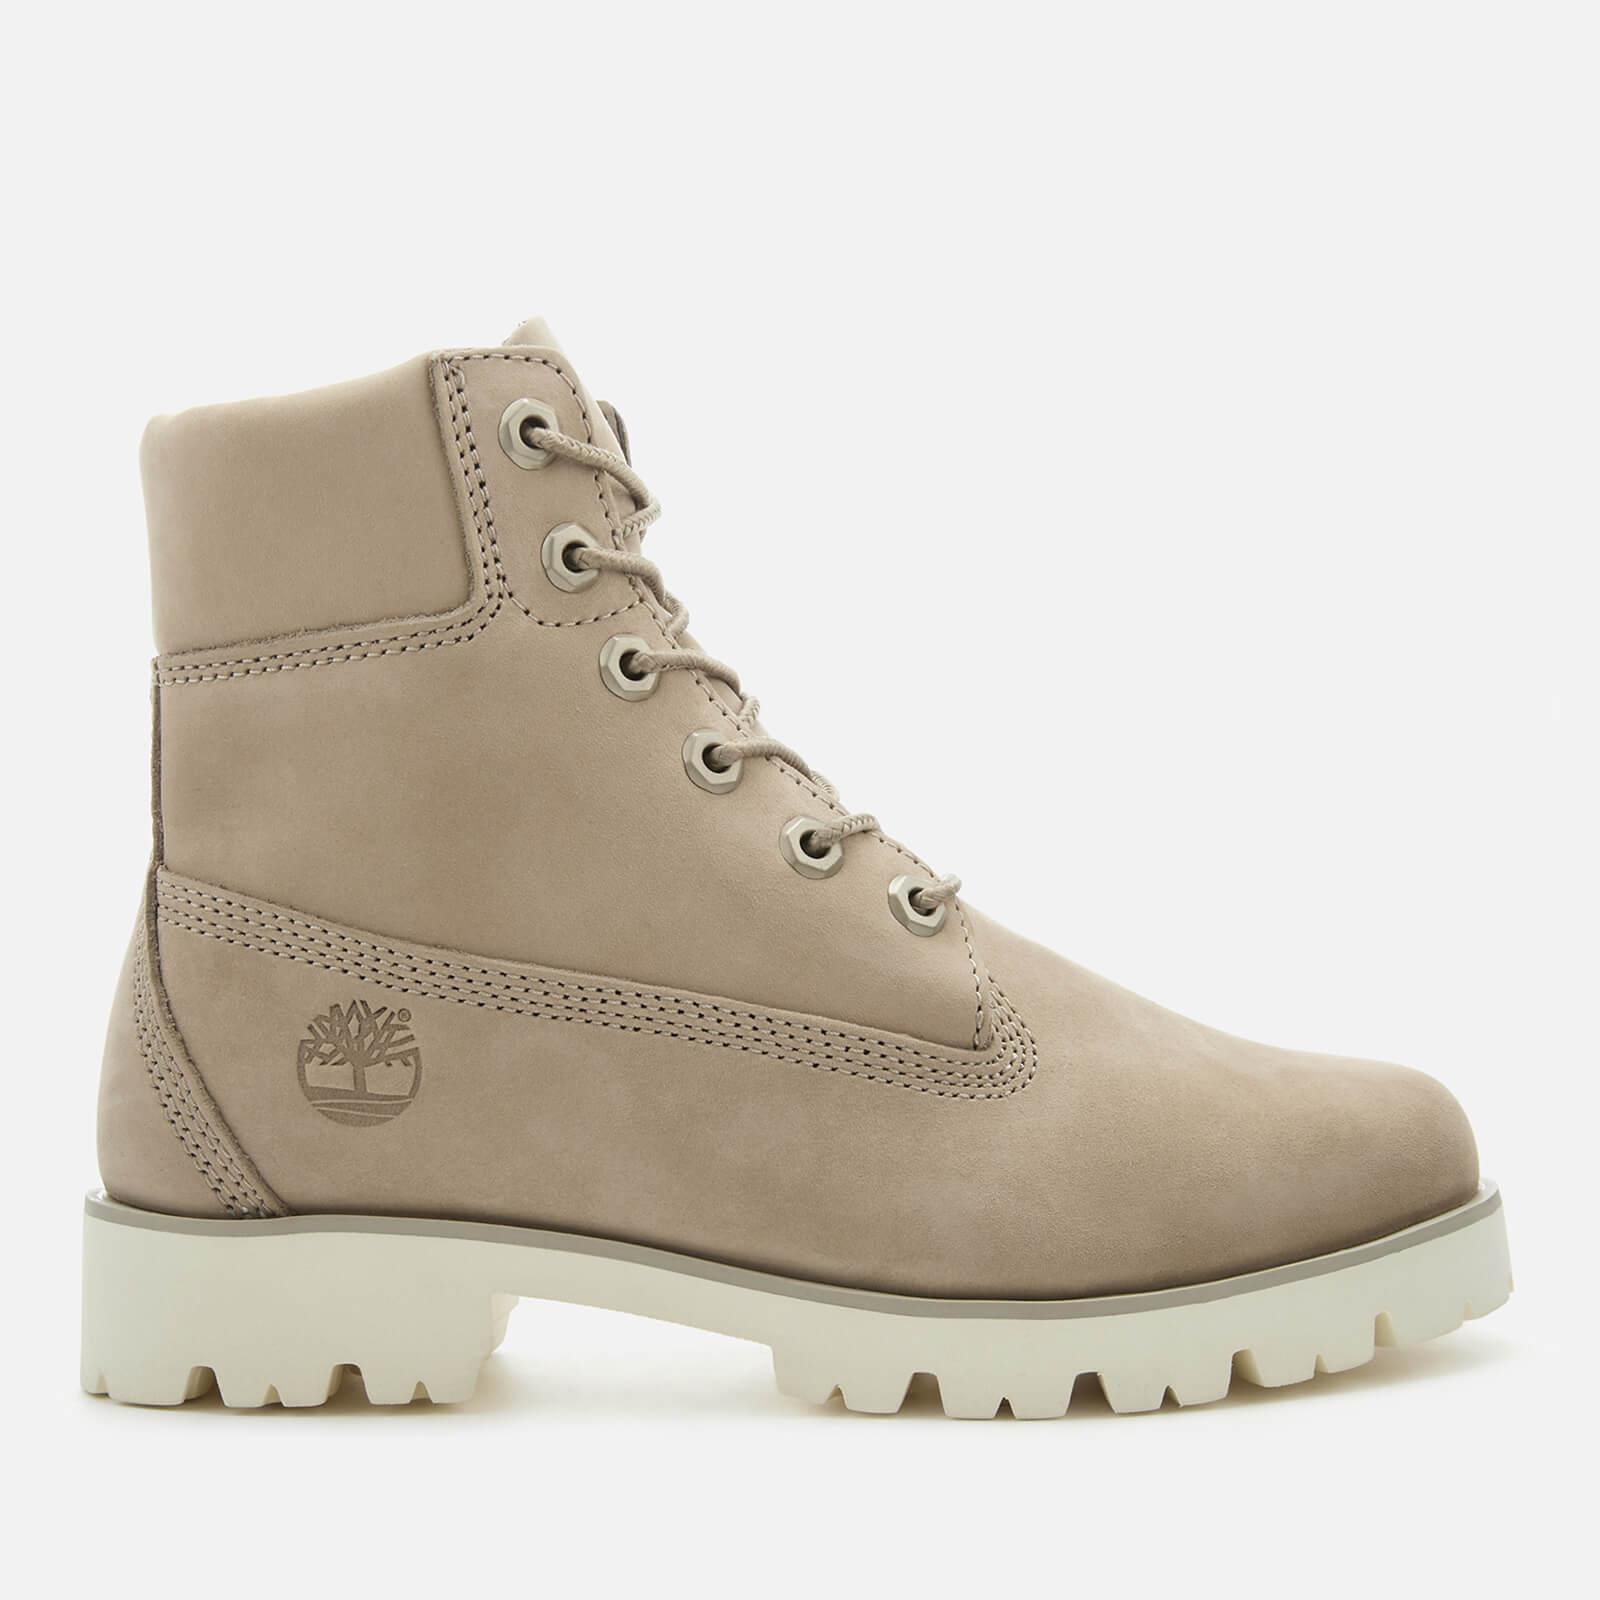 Timberland Leather Heritage Lite 6 Inch Boots in Grey (Gray) - Lyst